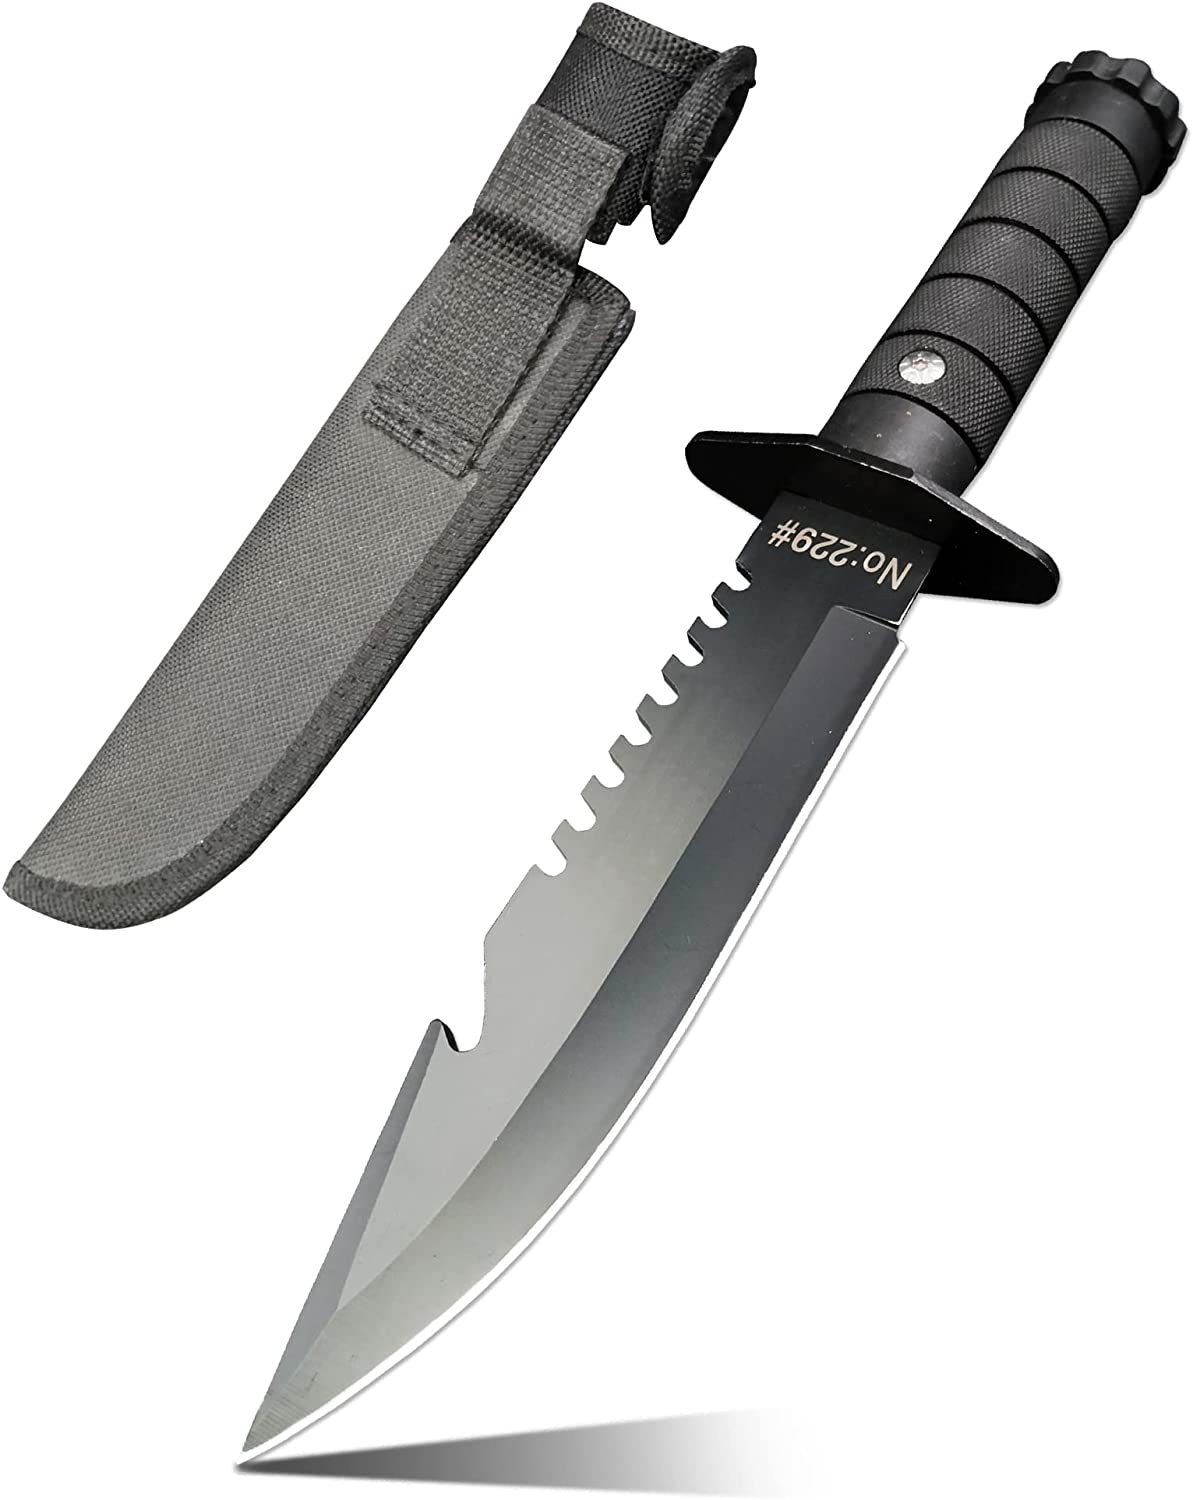 DOOM BLADE 11.2 inch Serrated Fixed Blade Knife with Sheath, Survival Camping Knife, Bowie Type Hunting Knife